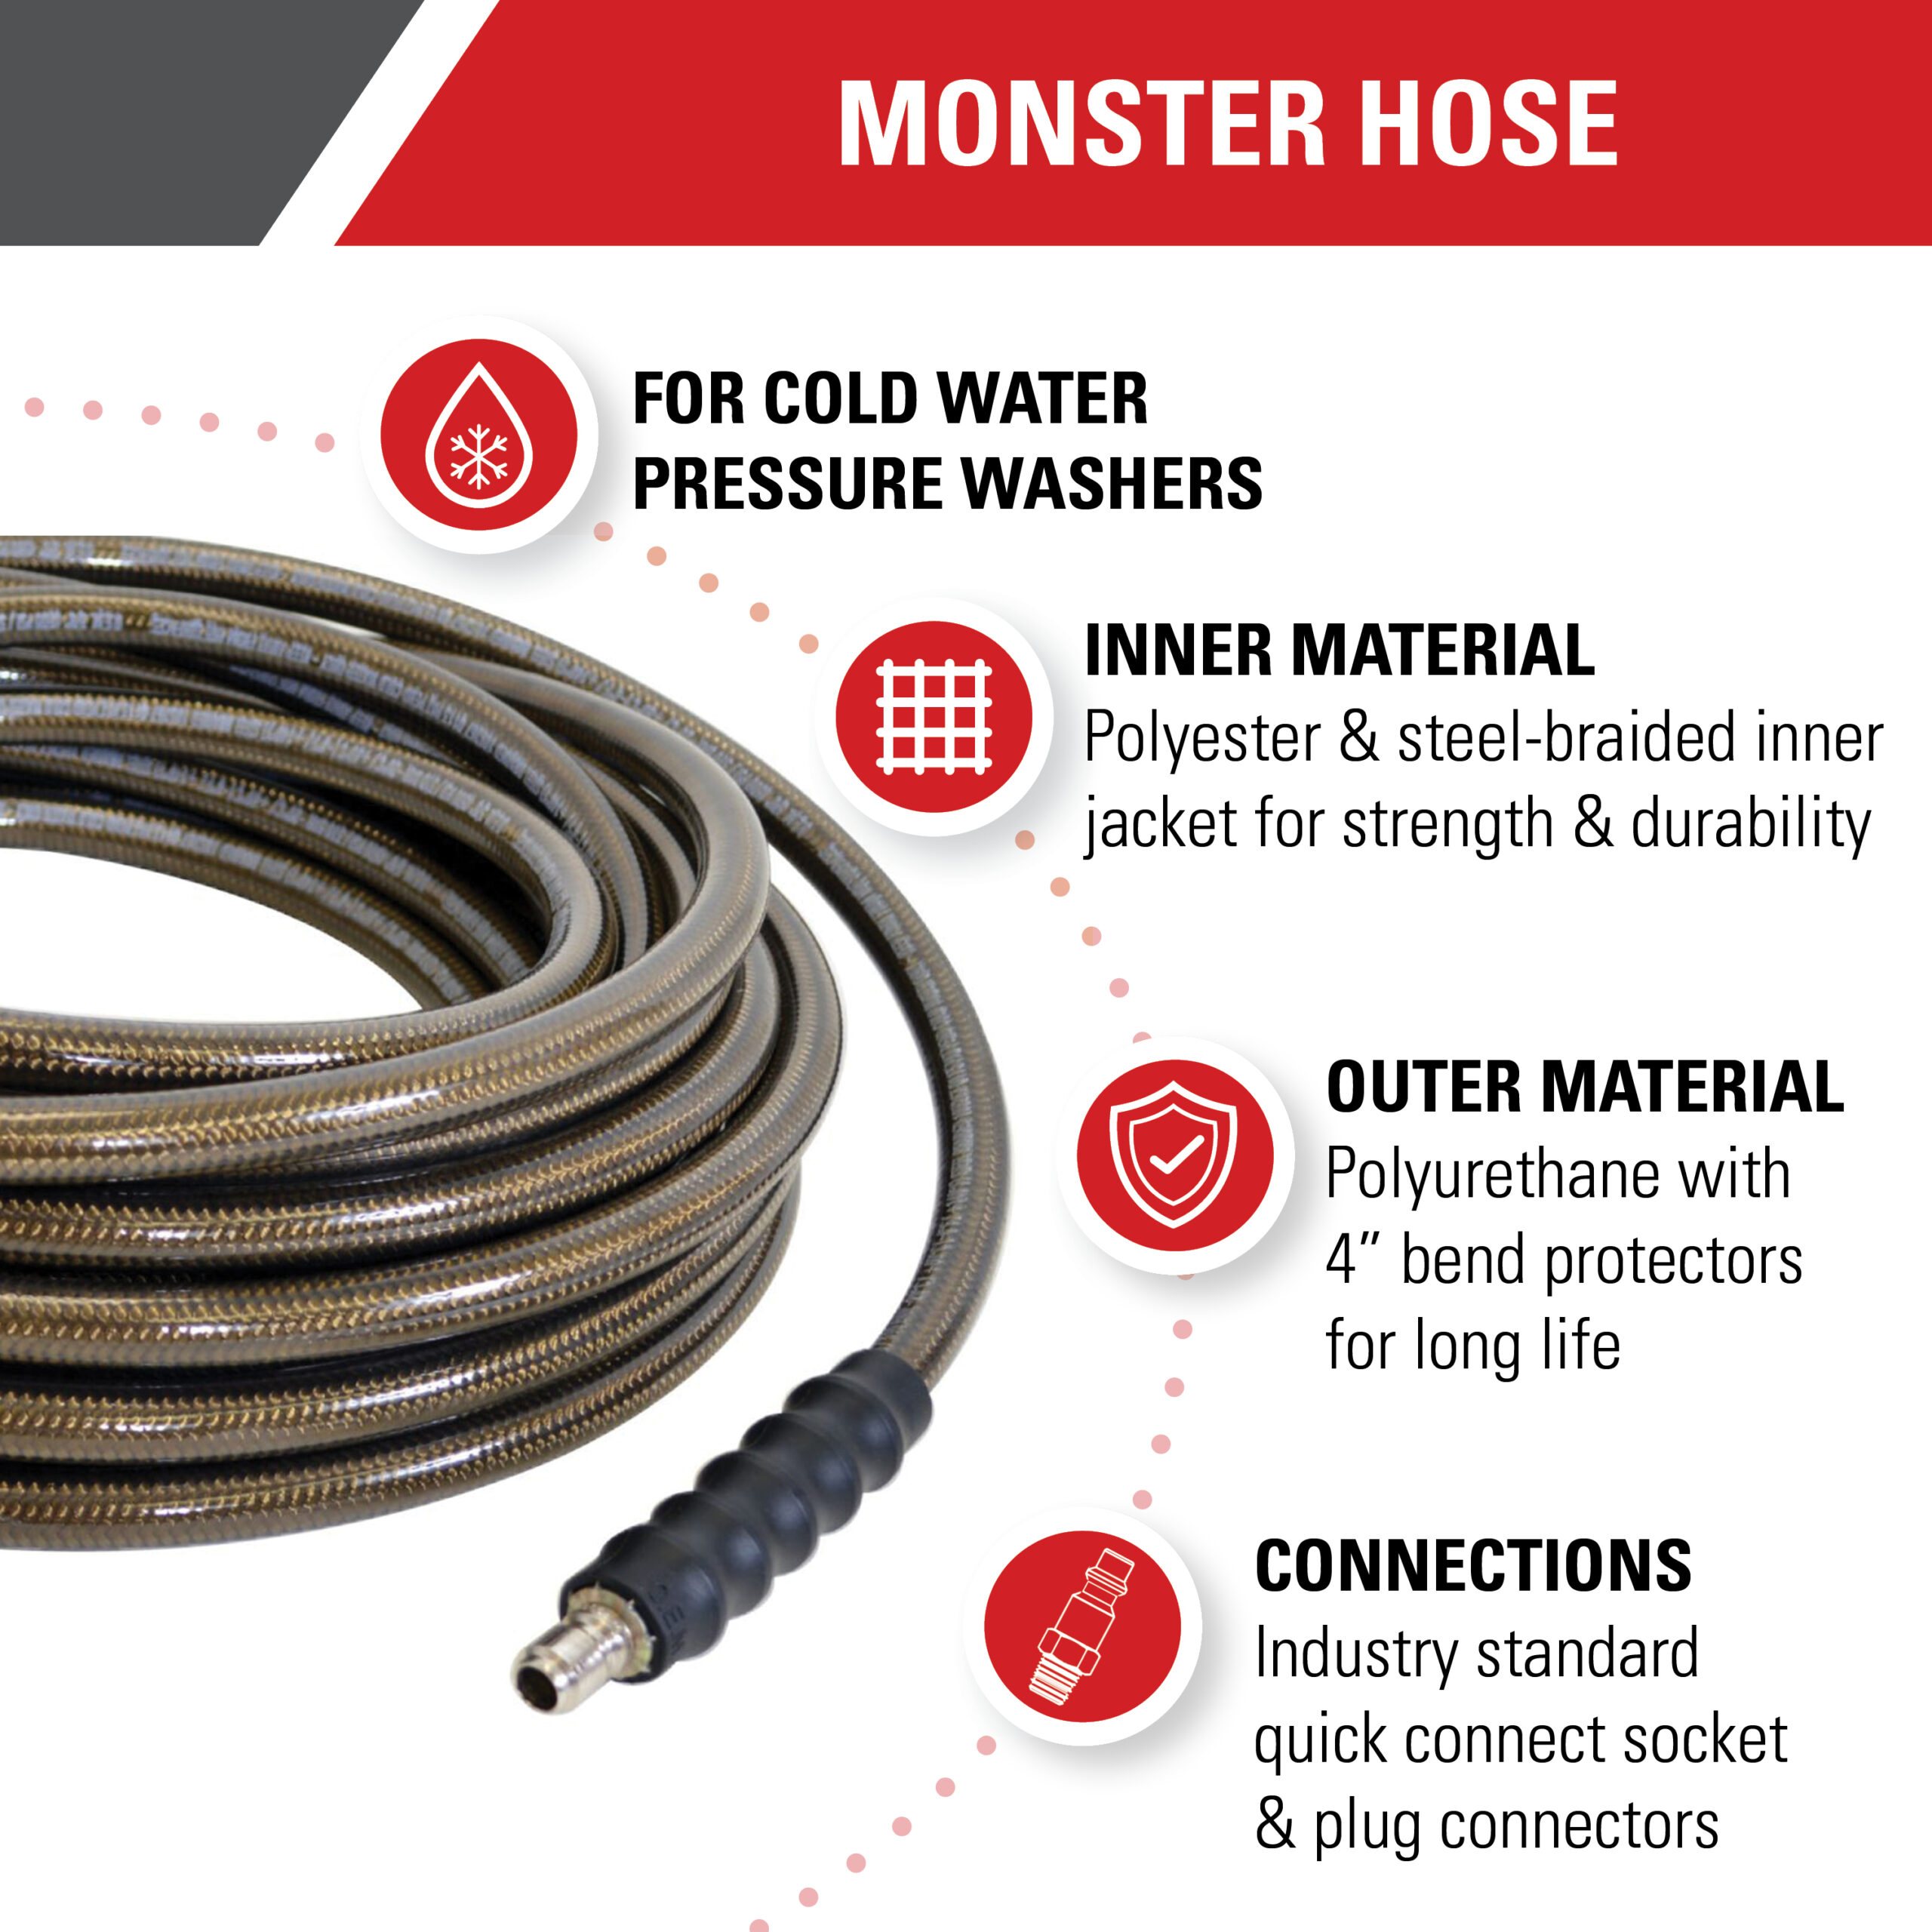 pressure washer; power washer; simpson; simpson cleaning; fna; fna group; oem technologies; aaa pump; pump; pressure washer hose; 4500 psi; quick connect; 41032; cold water hose; dual-braided; steel; polyester; hose;